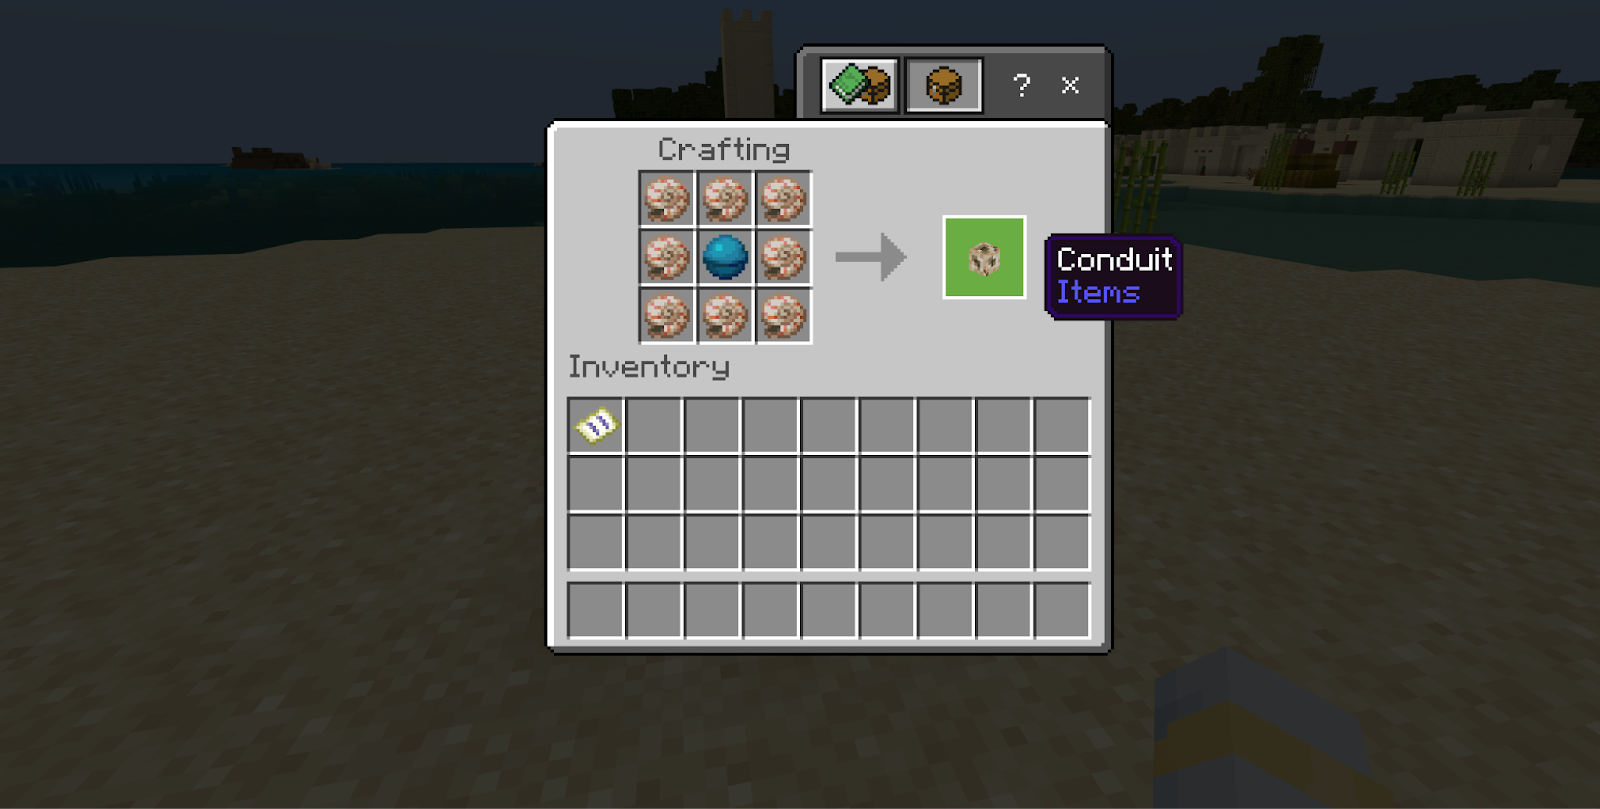 This image demonstrates what the conduit crafting recipe looks like in the crafting table's crafting area.